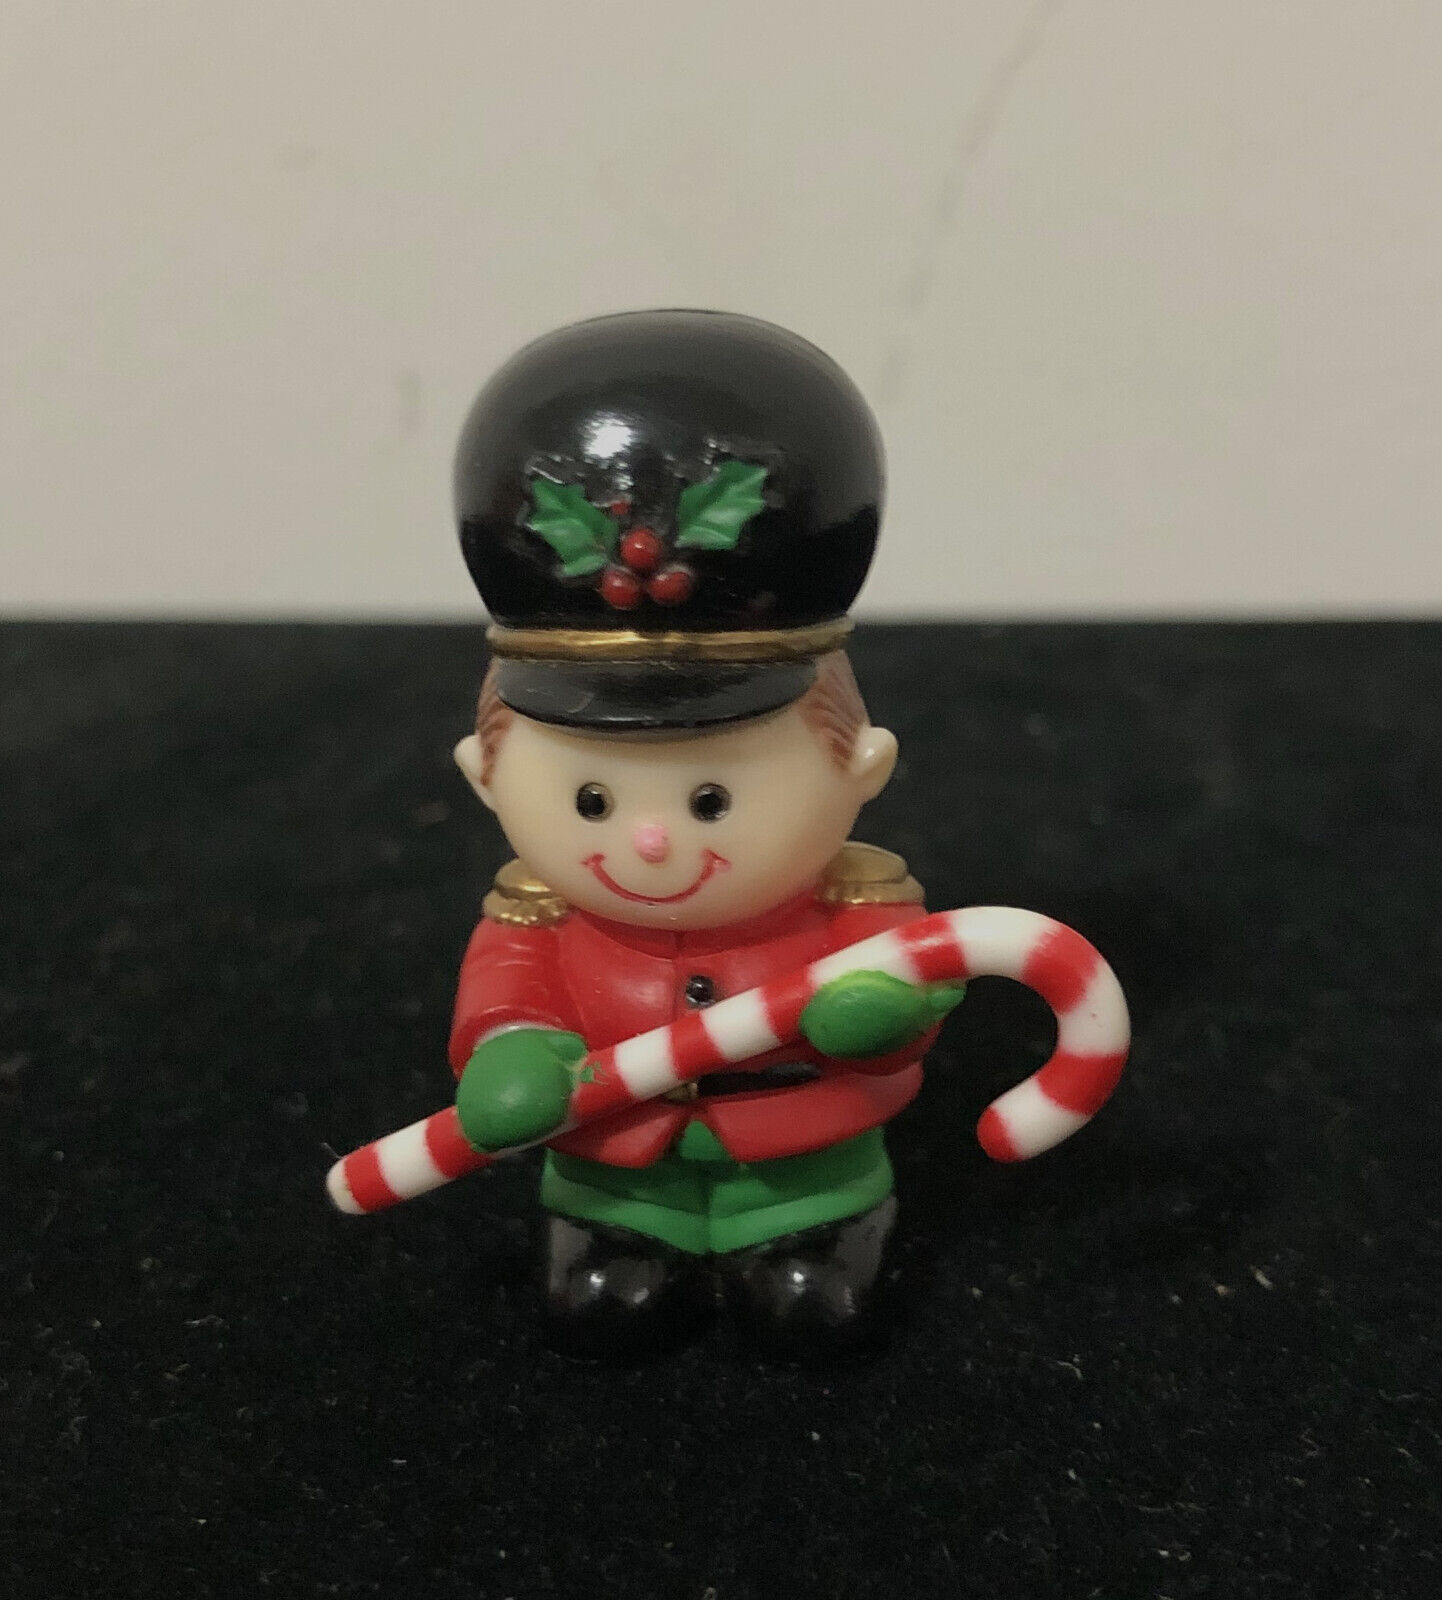 Vintage Russ Berrie Miniature Christmas Soldier with Holly & Candy Cane Figurine